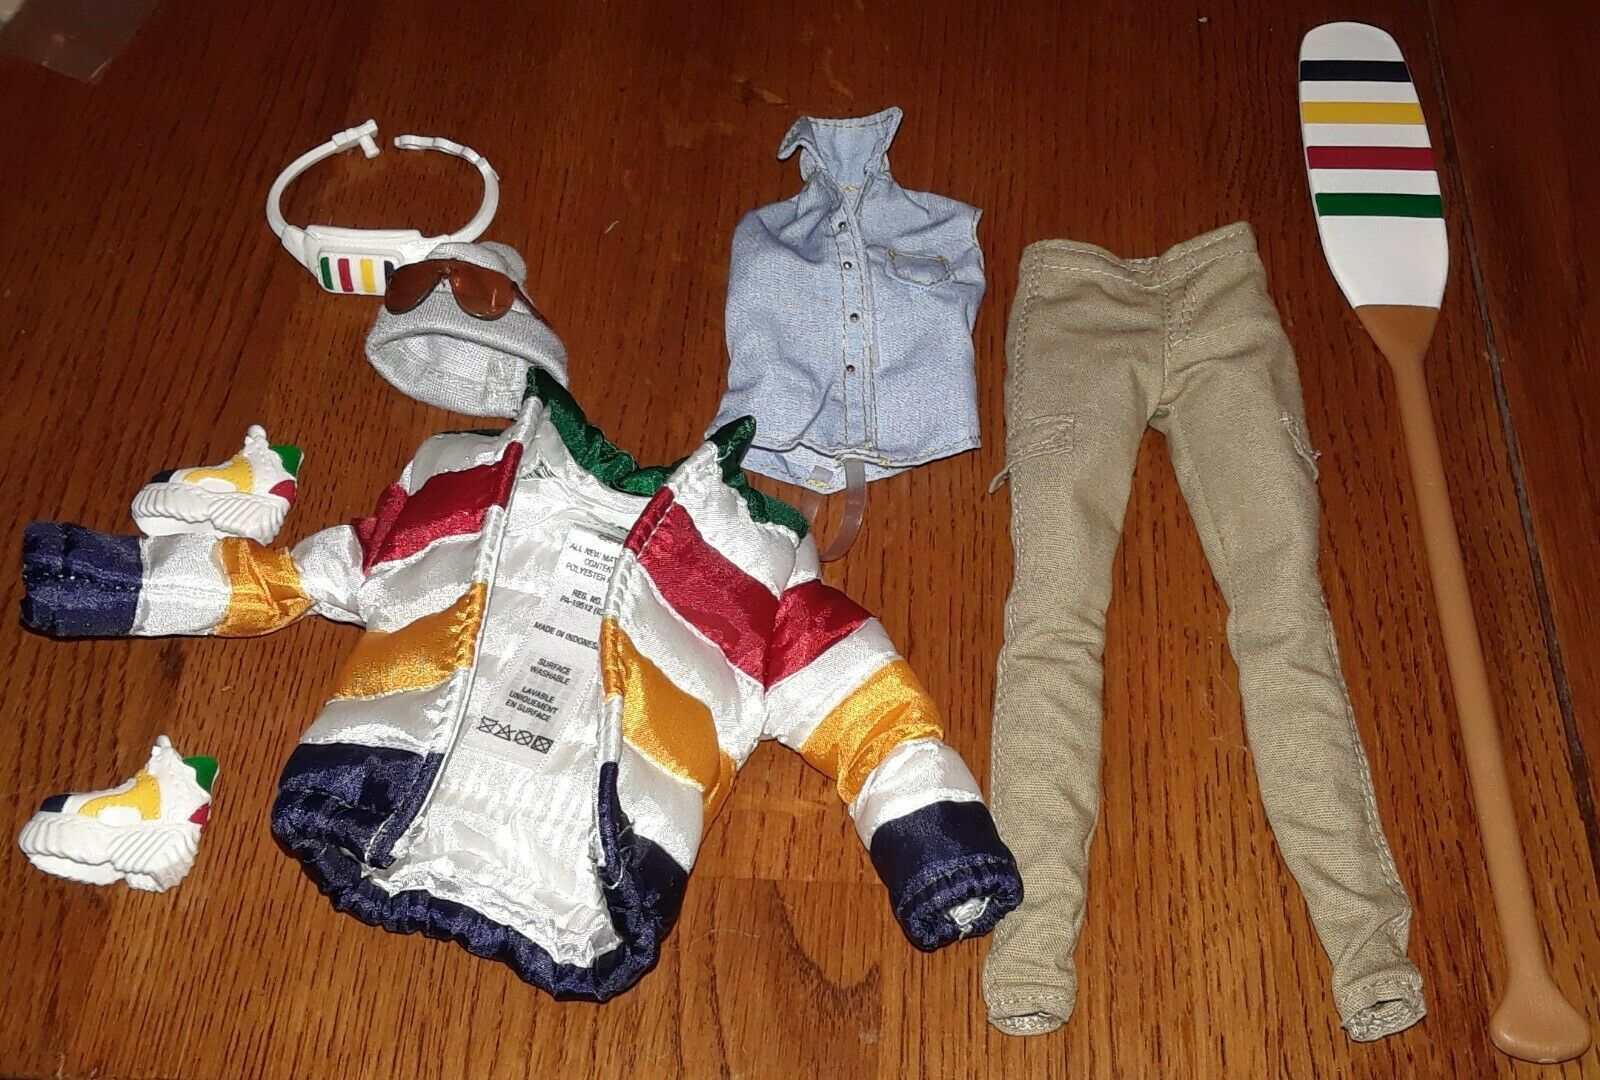 Barbie Hudson Bay Hbc Stripes 2020 Doll Outfit Fully Articulated Ght68